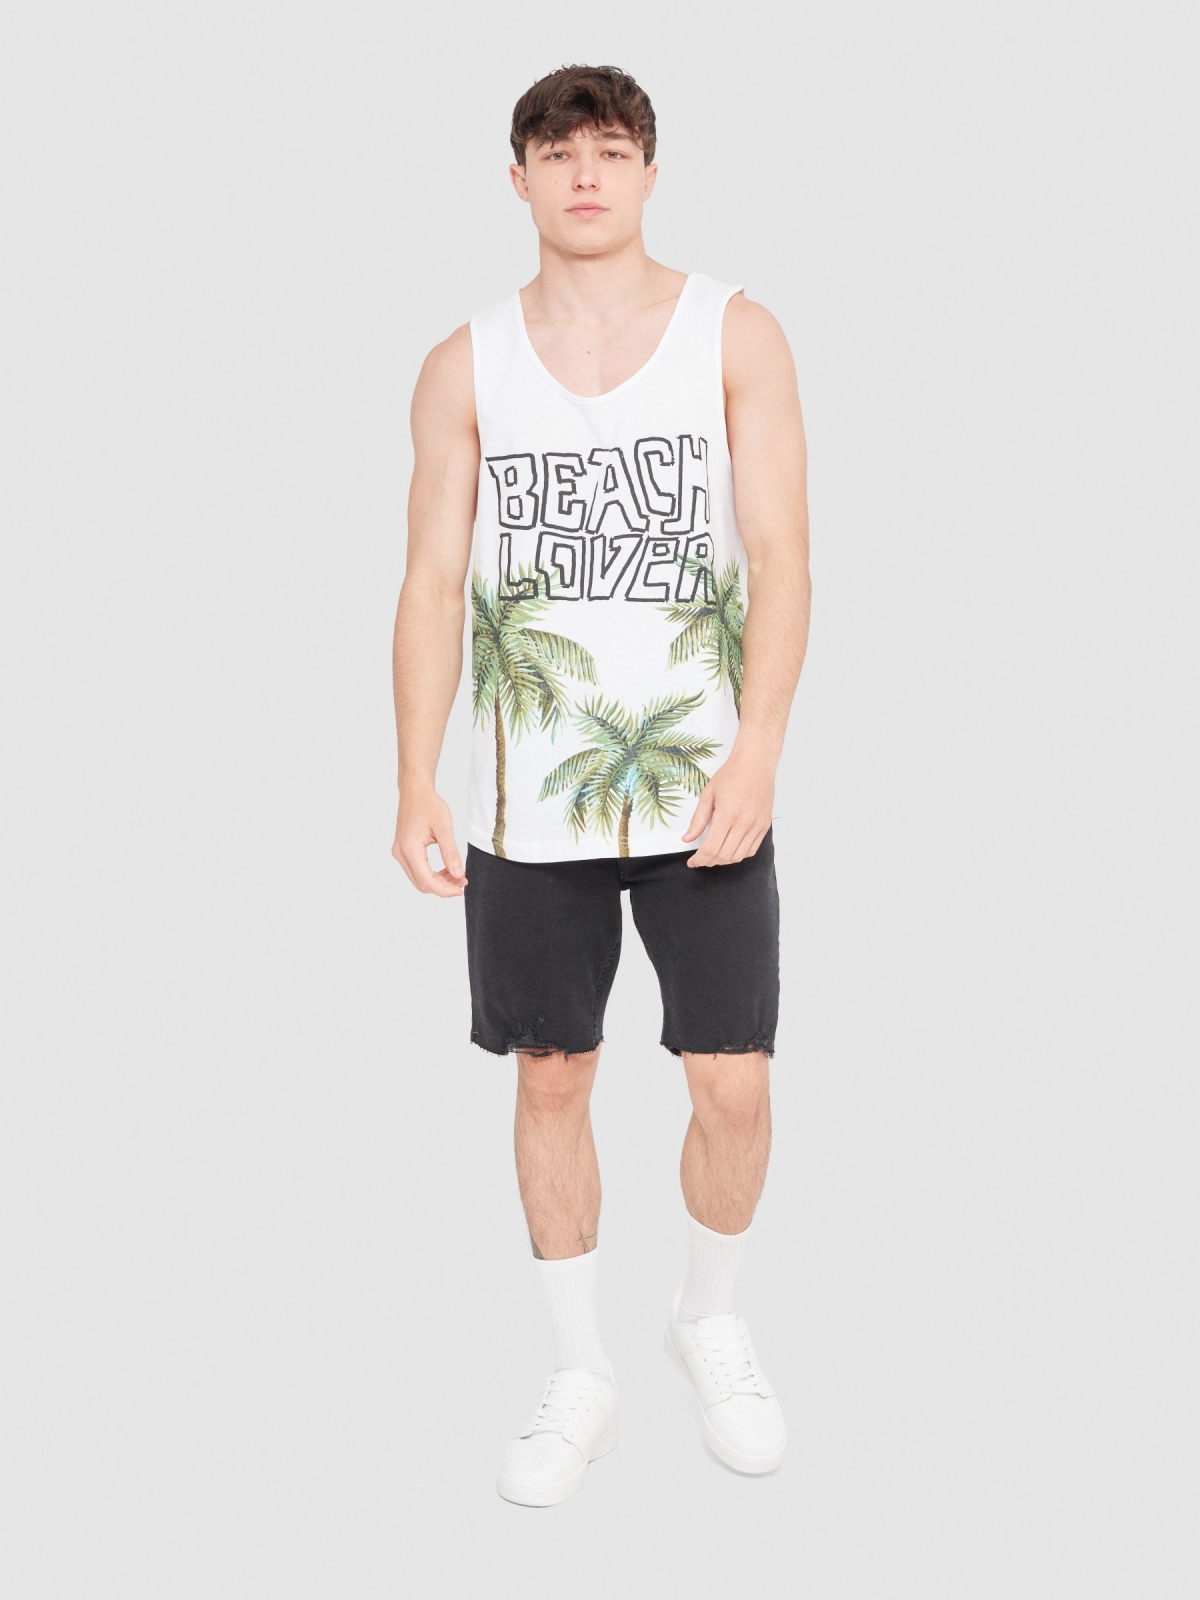 Beach lover tank top white front view